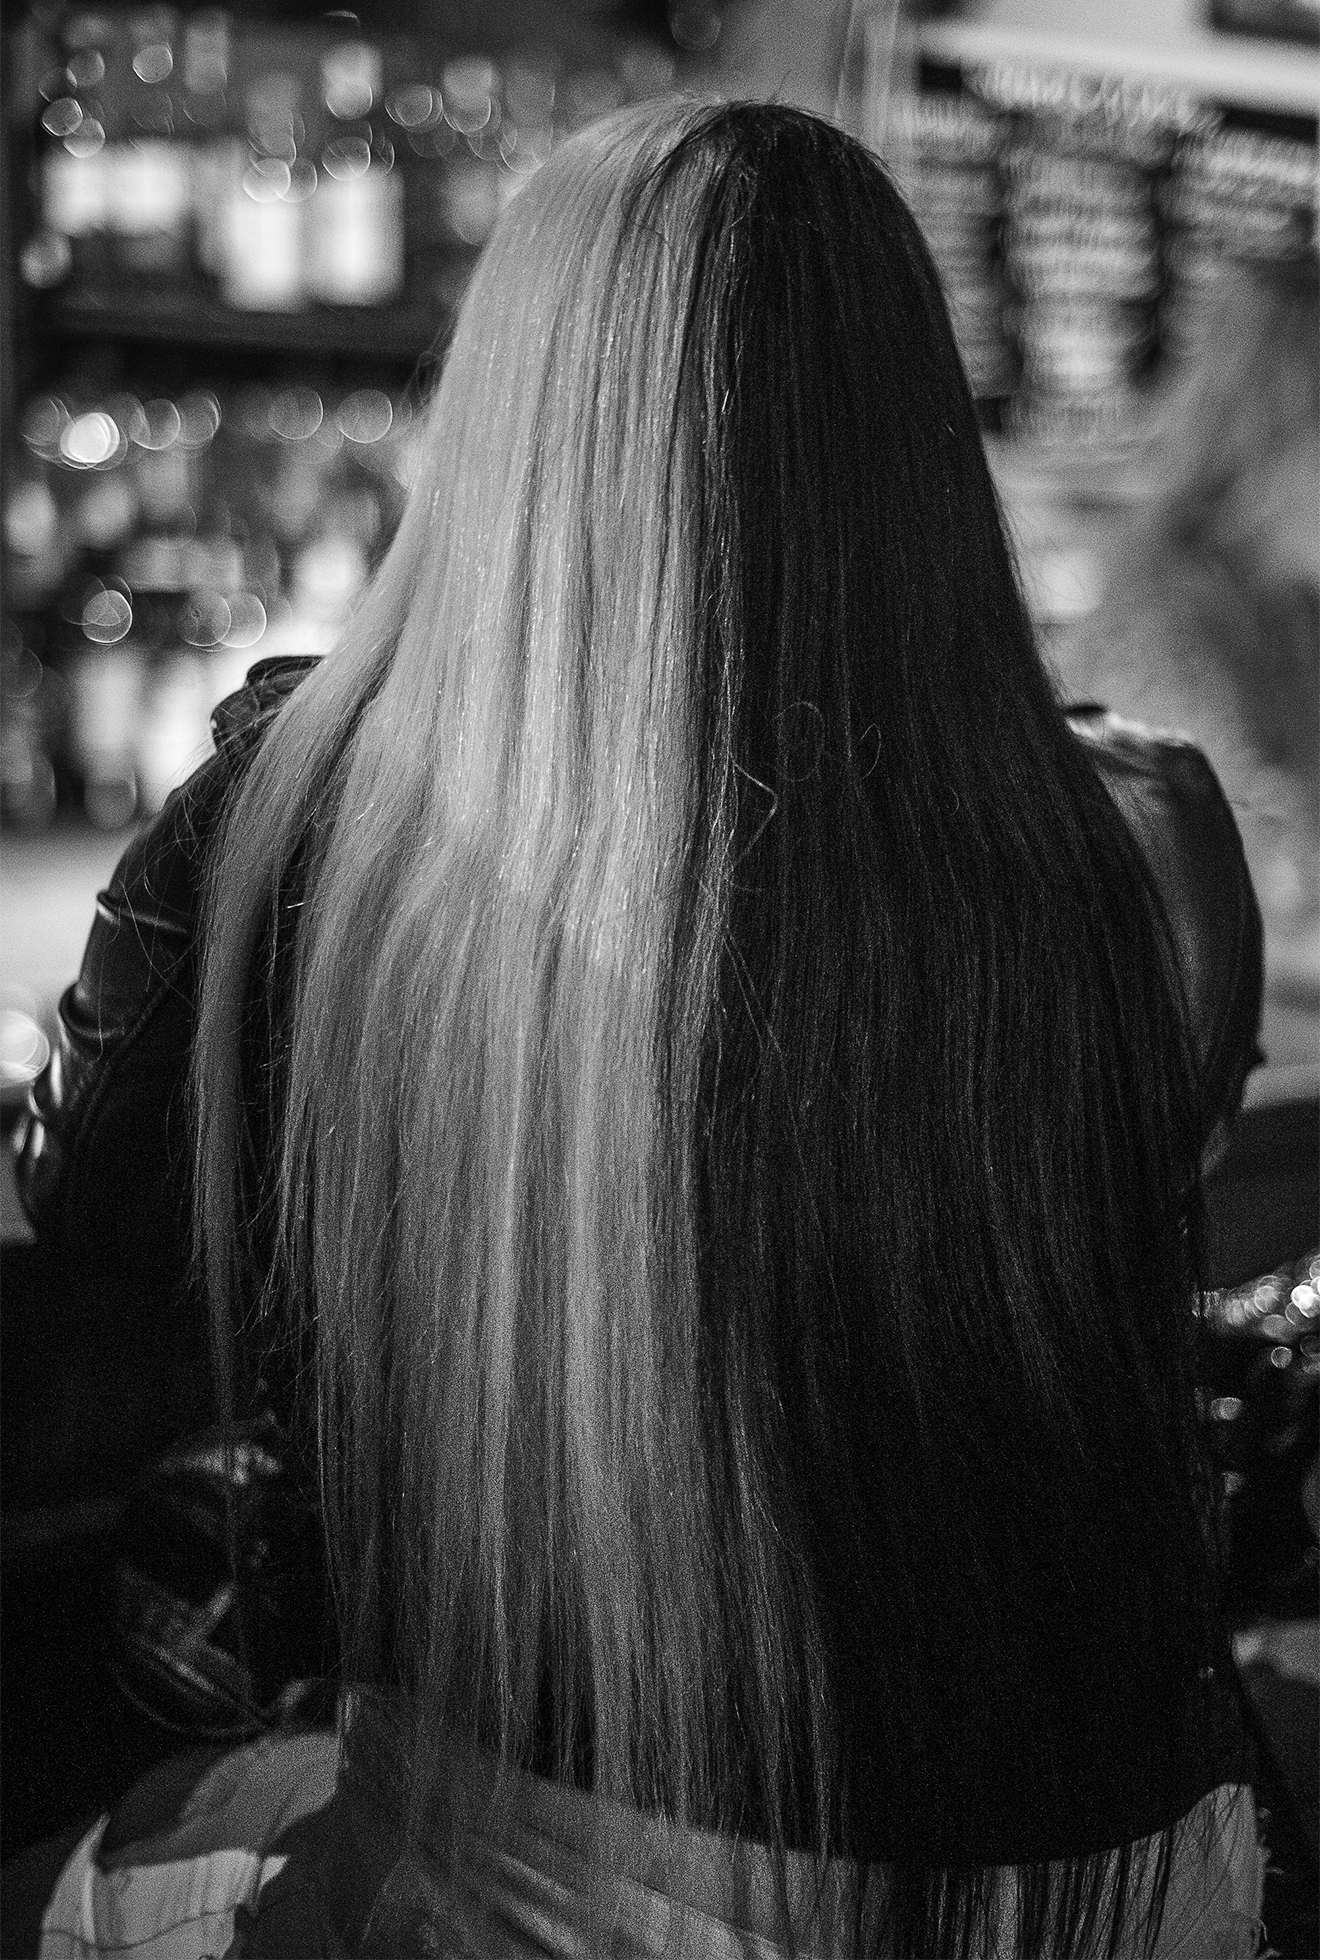 A woman sits at Sweetie’s Art Bar in San Francisco in 2020 with her back to the camera. She has waist-length, straight blond hair that covers her back.